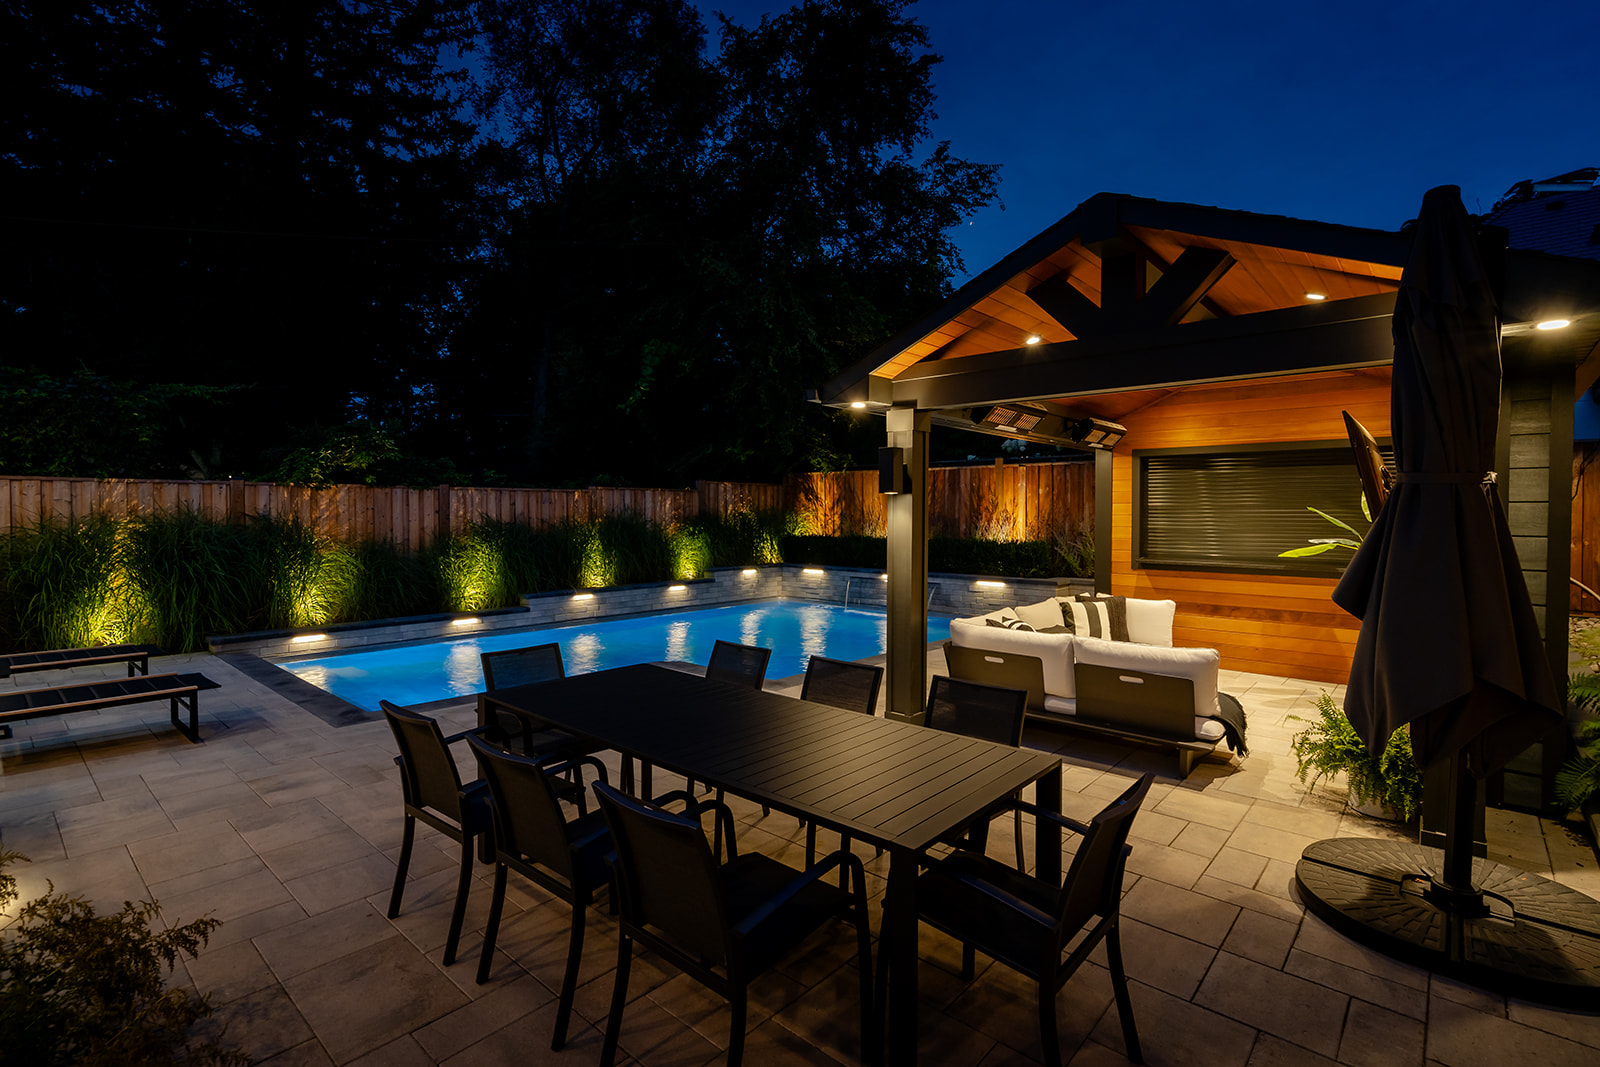 An outdoor patio set with the pool in the background with lights on.